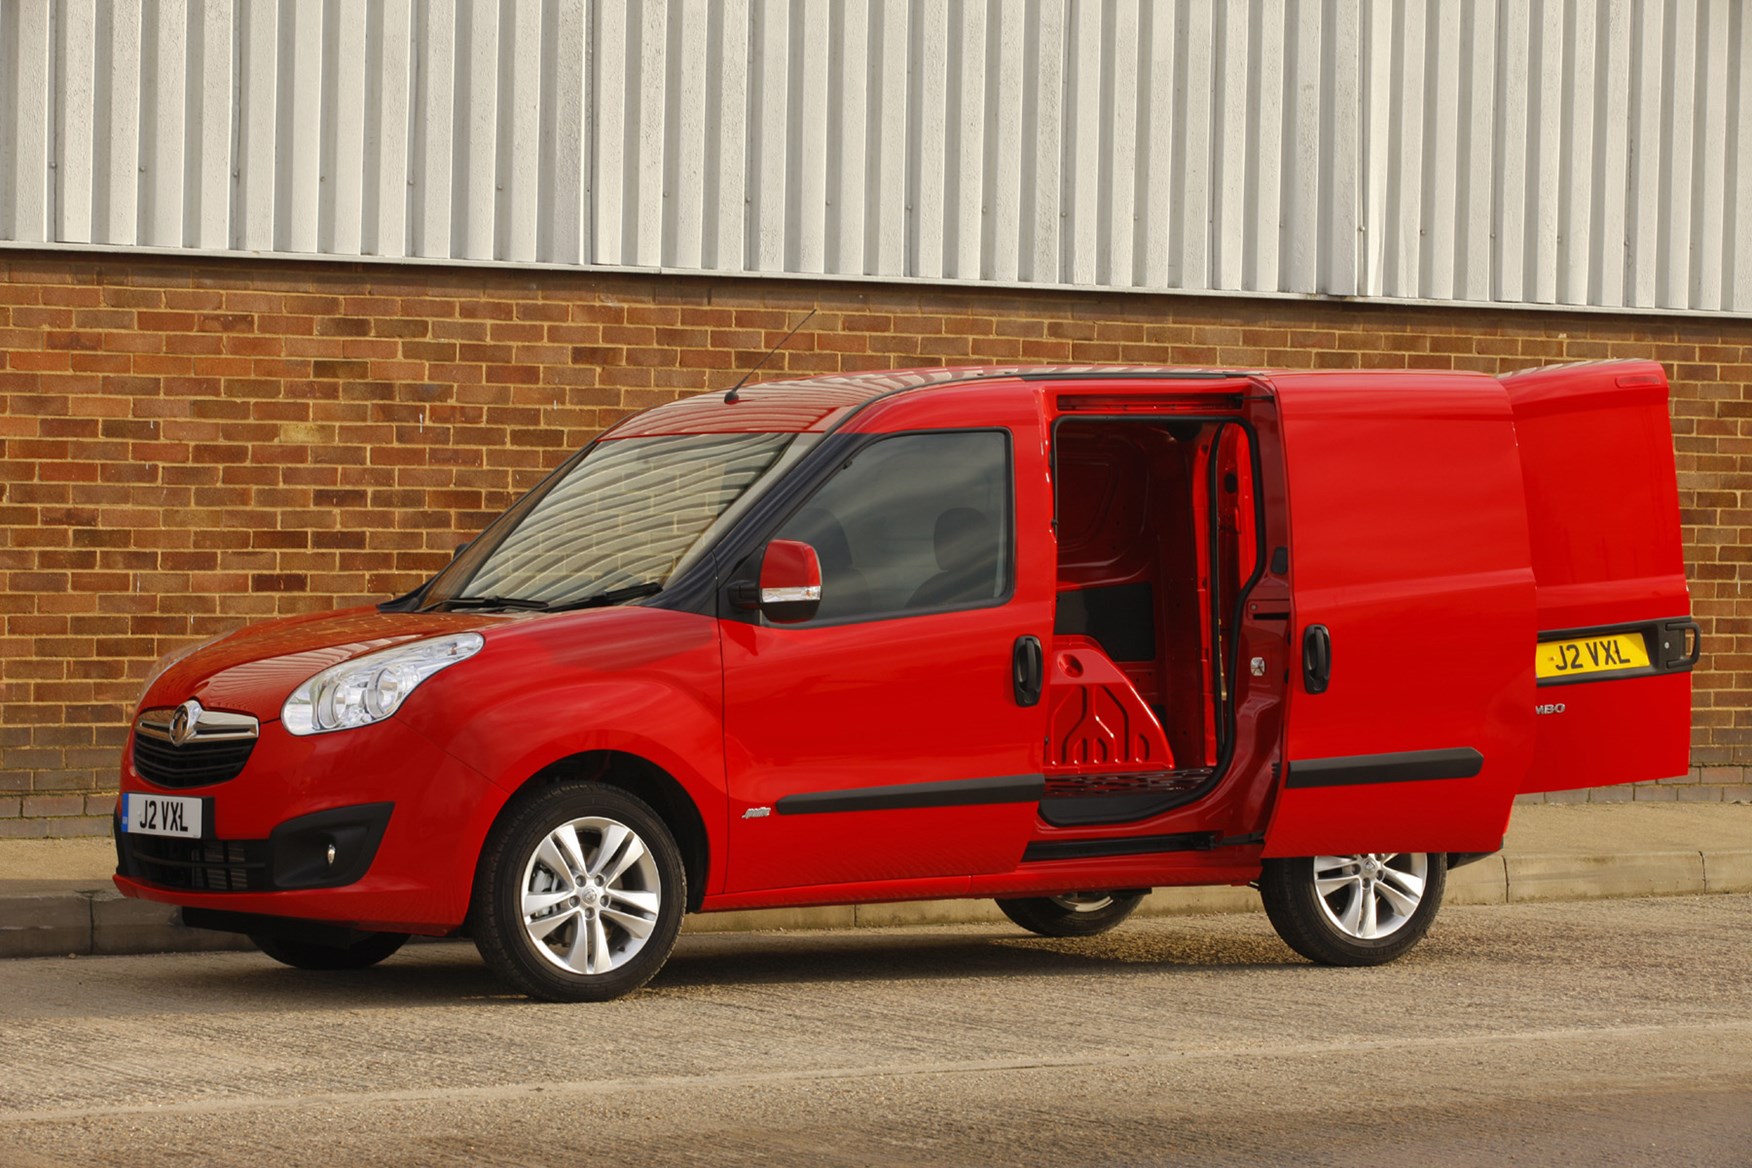 Vauxhall Combo full review on Parkers Vans - load area